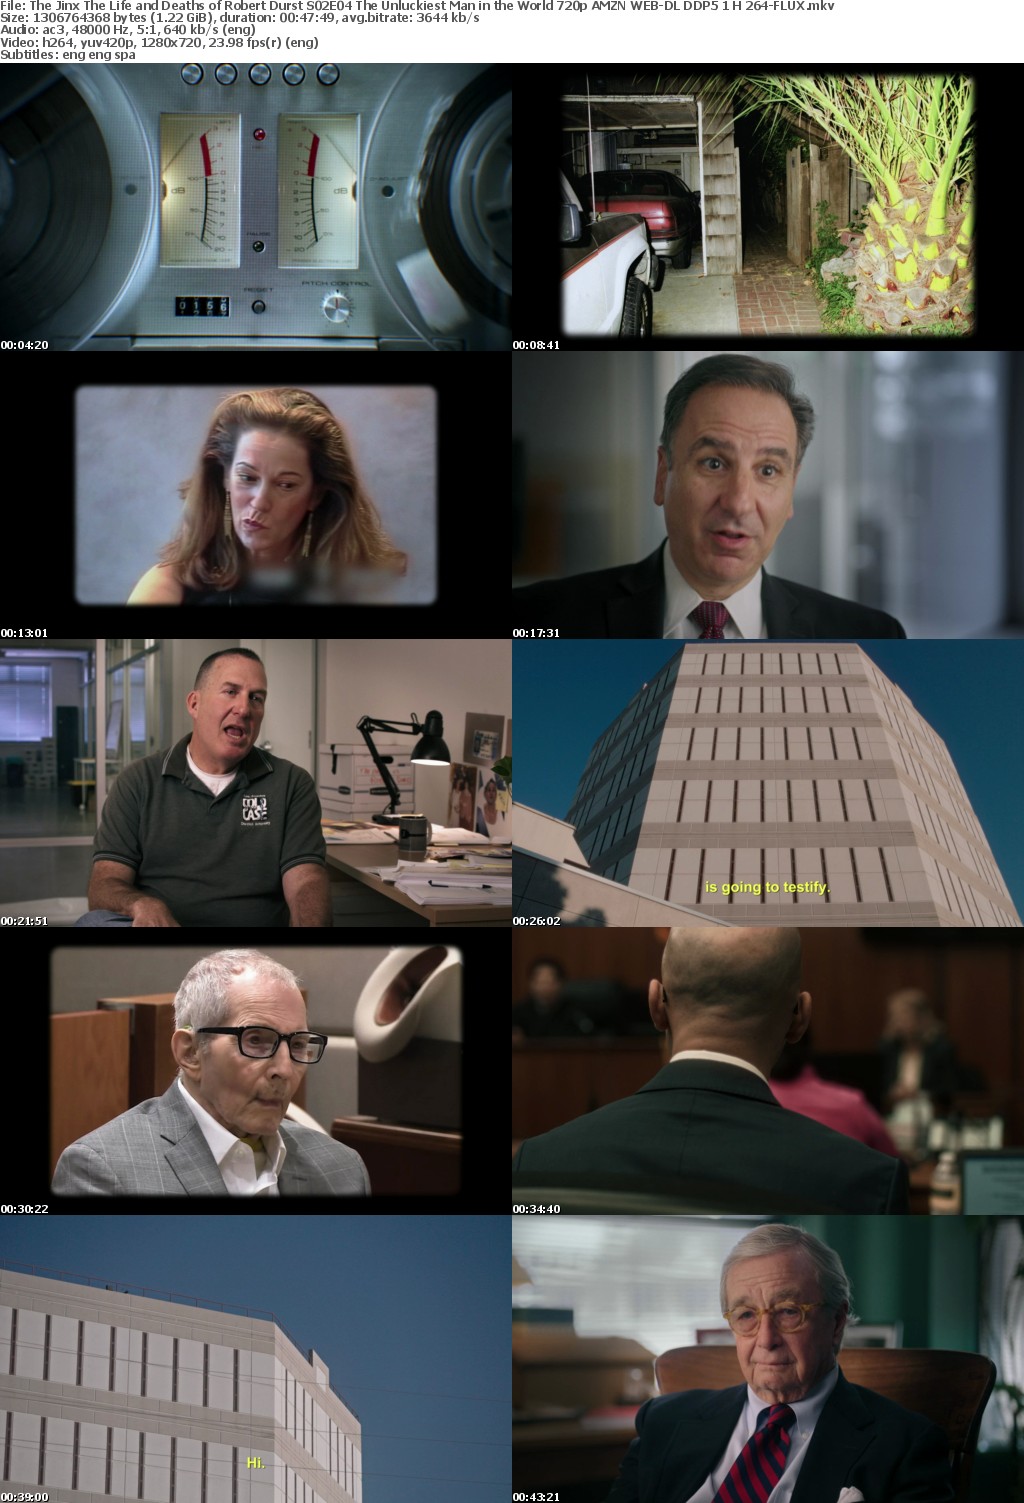 The Jinx The Life and Deaths of Robert Durst S02E04 The Unluckiest Man in the World 720p AMZN WEB-DL DDP5 1 H 264-FLUX